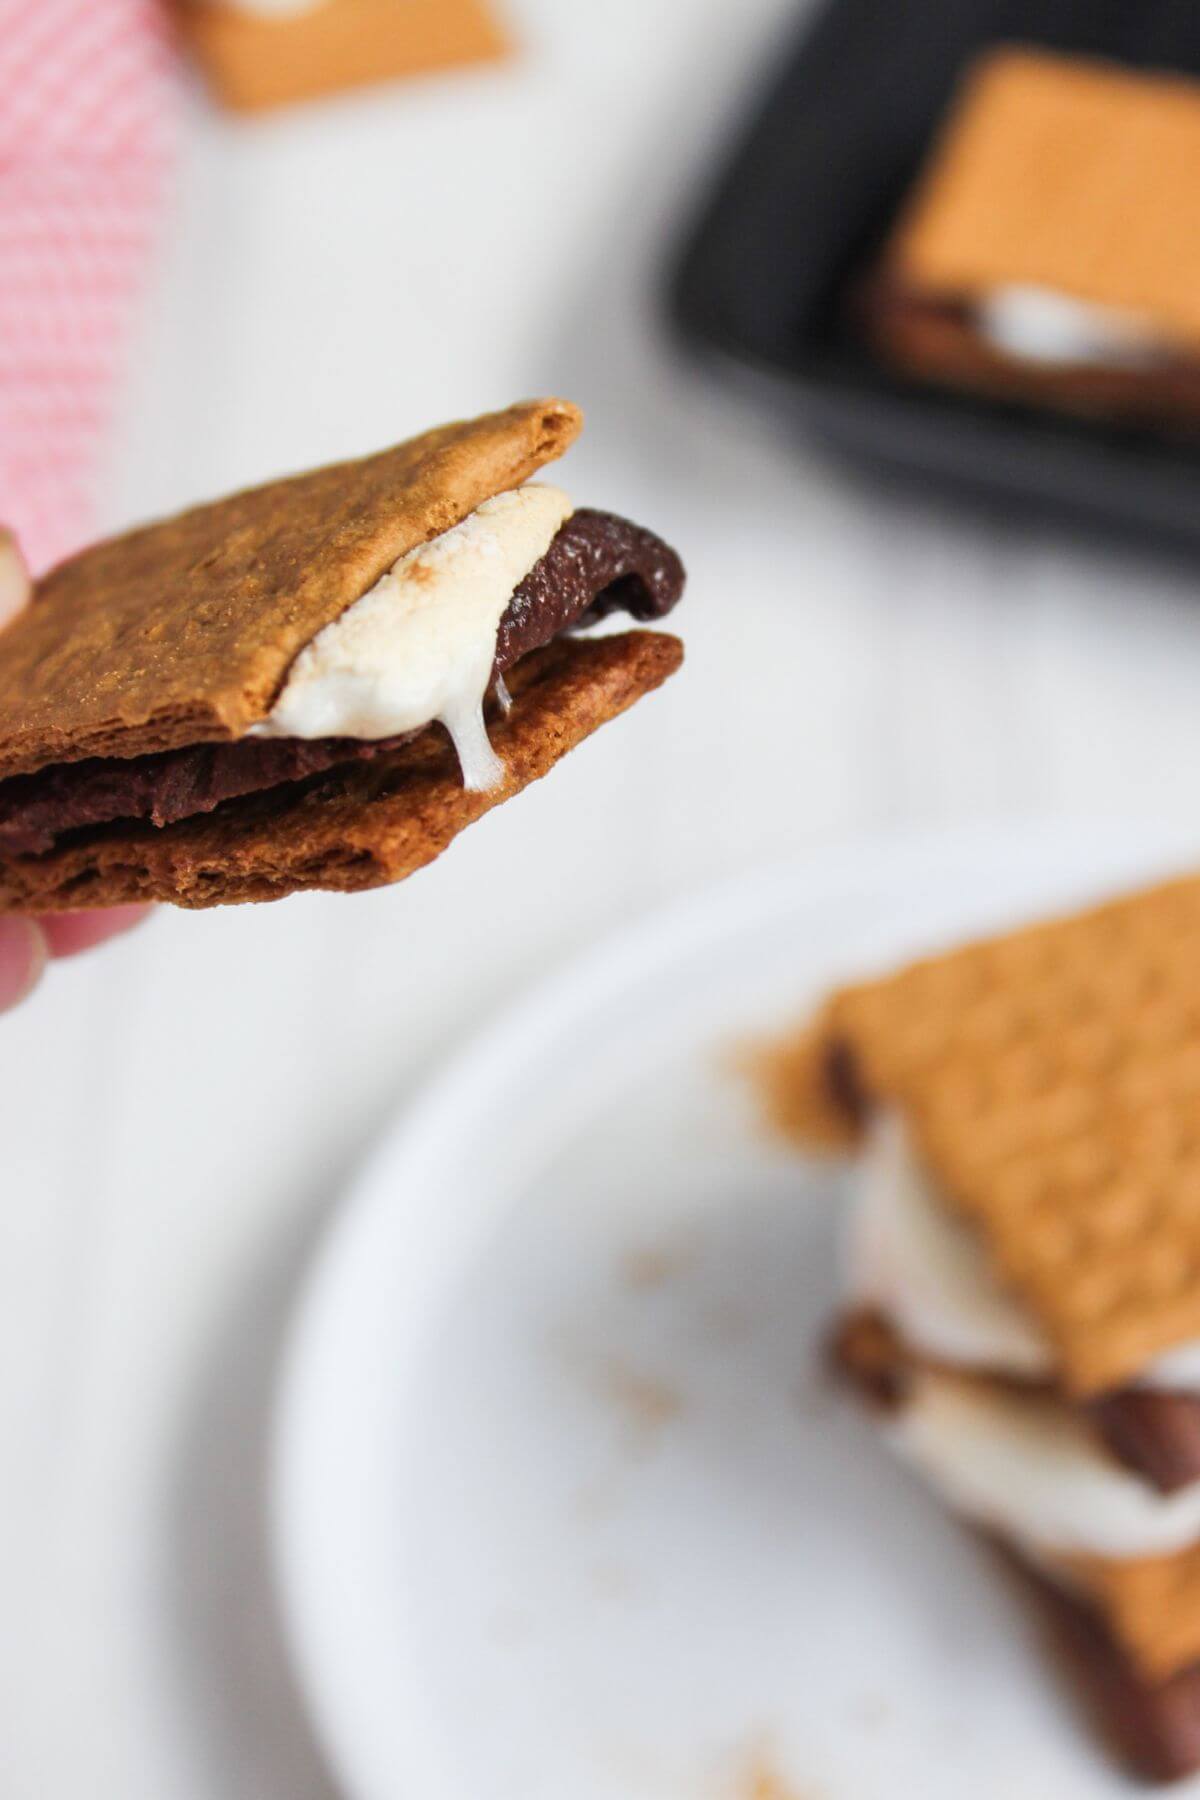 A person holding a s'more over a plate of s'mores.